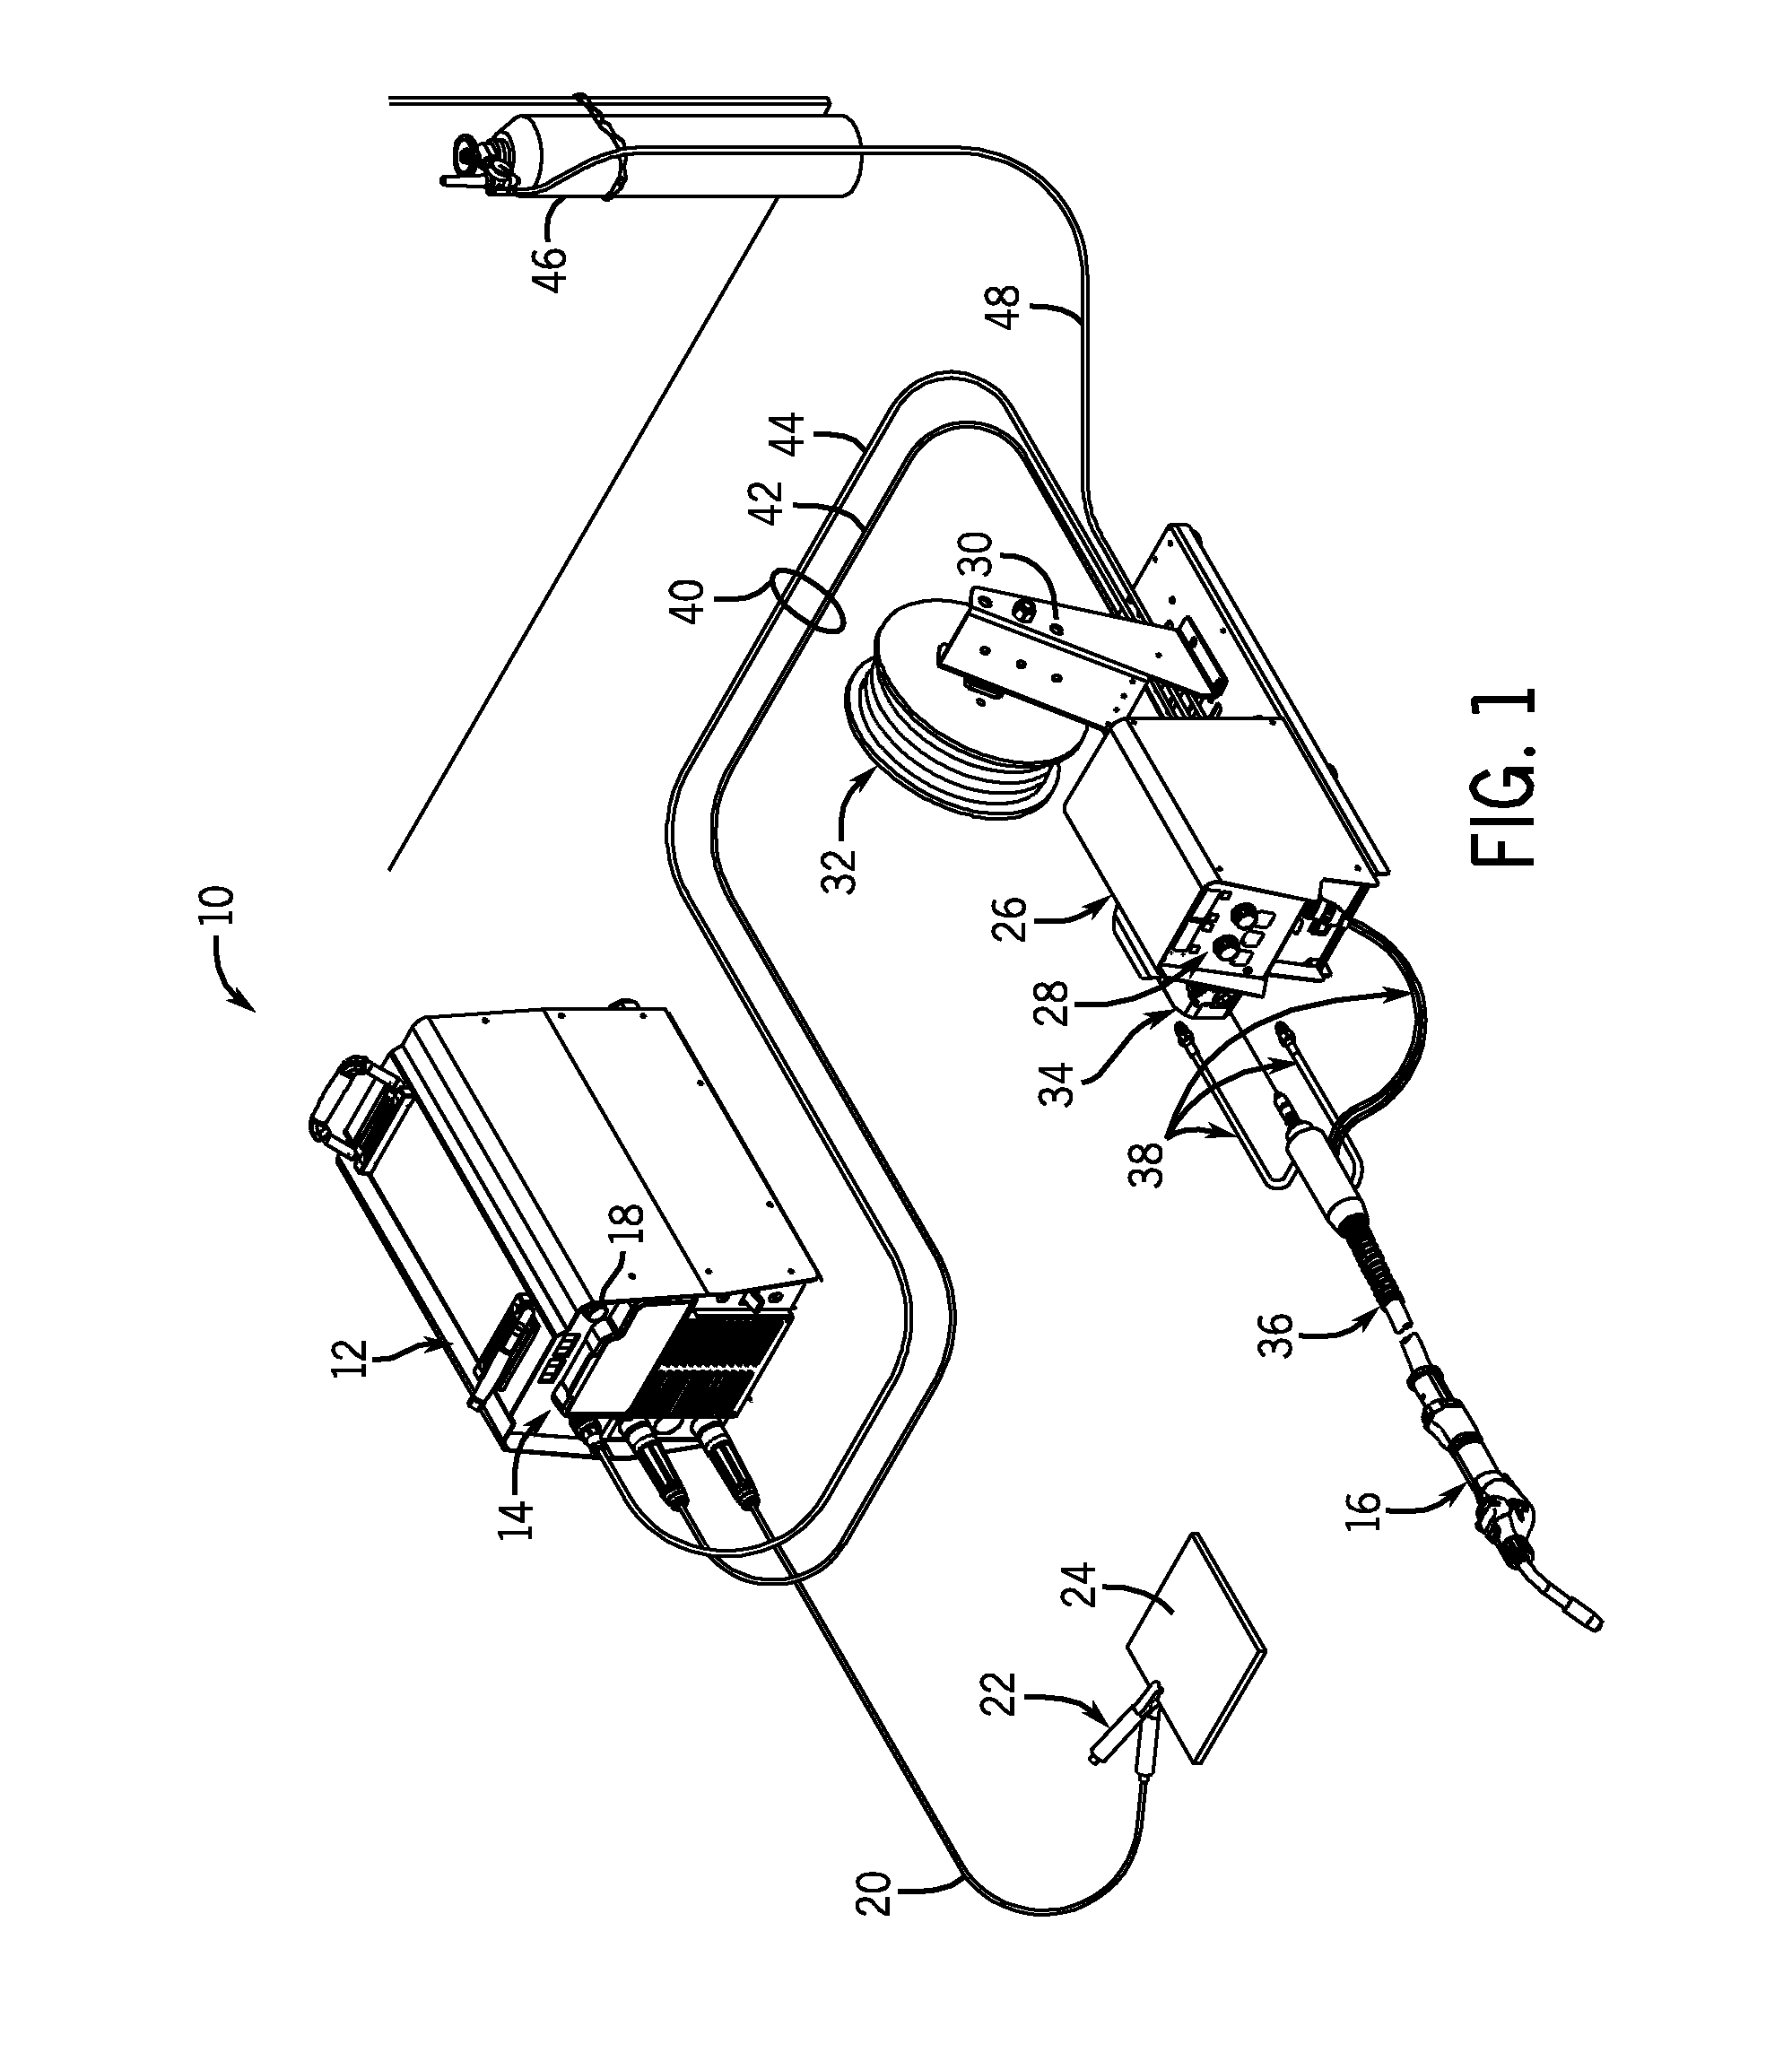 Wire feed motor control systems and methods